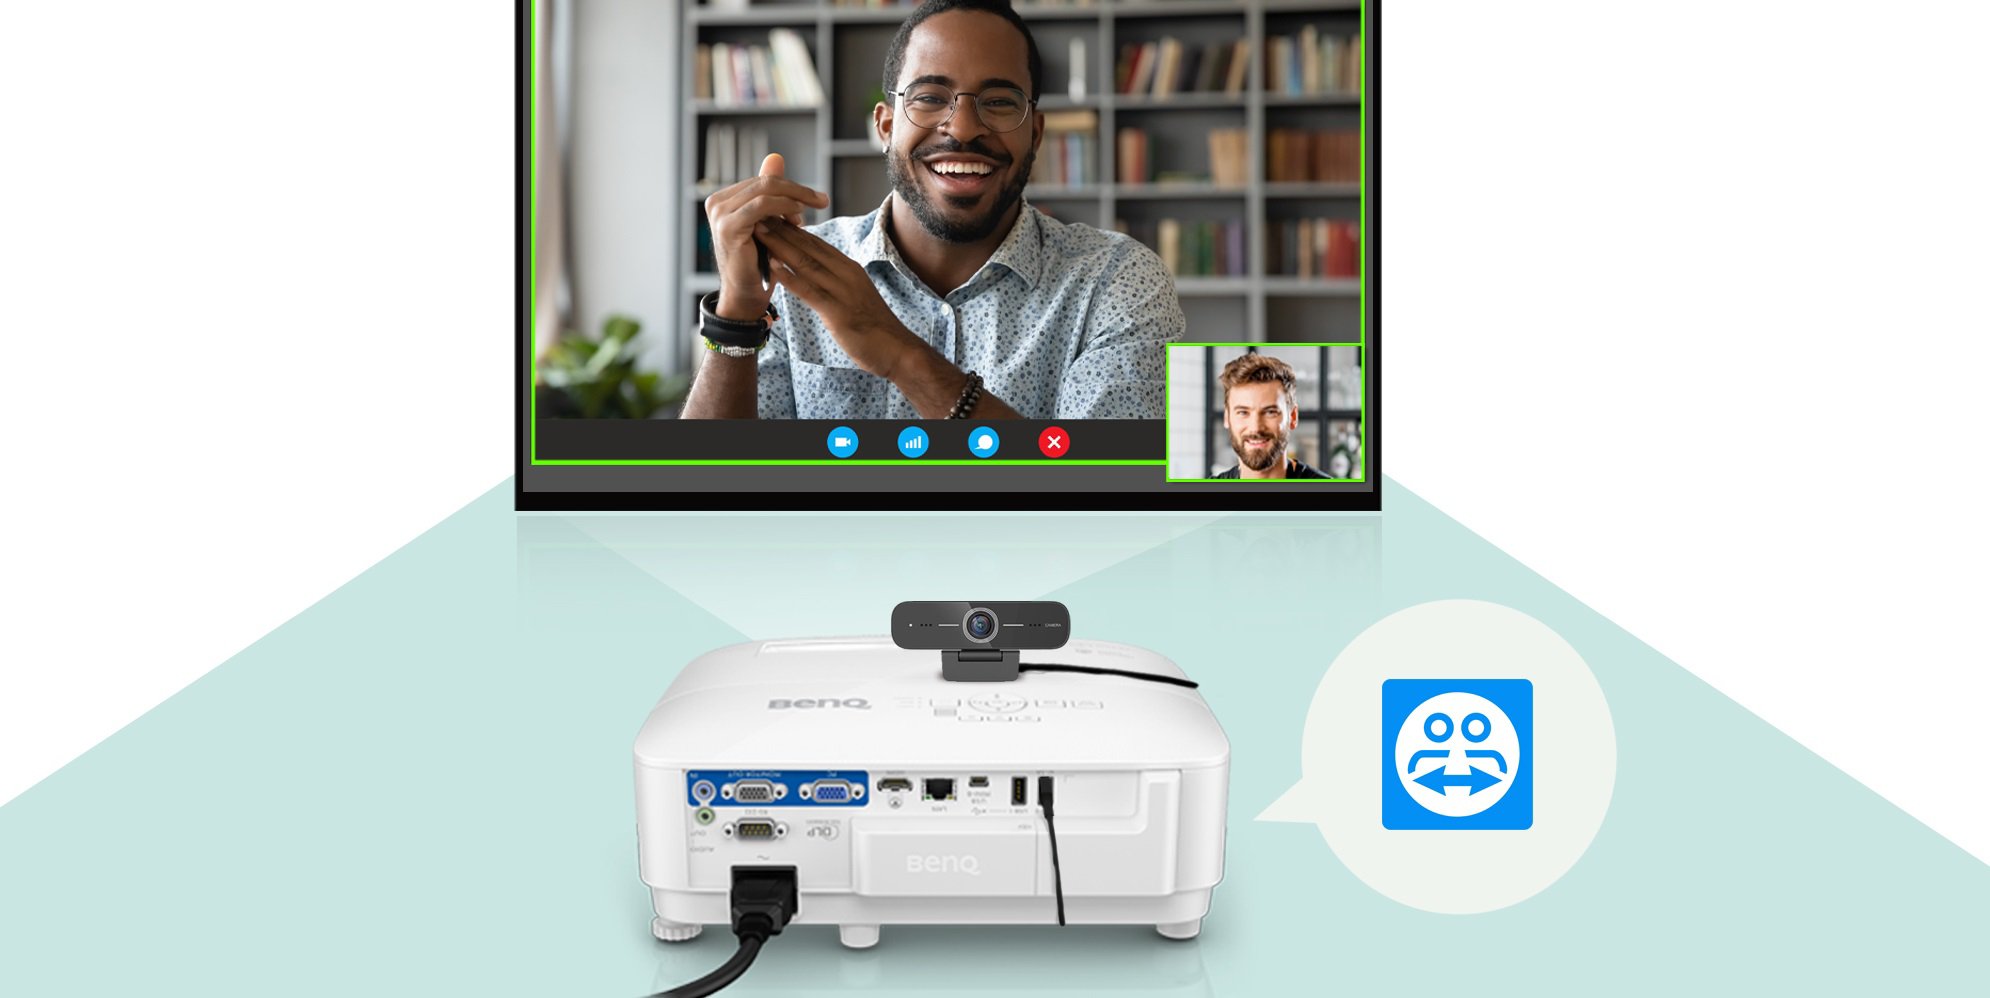 BenQ EX800ST smart projector for business enables software and hardware integration for starting remote meetings immediately.